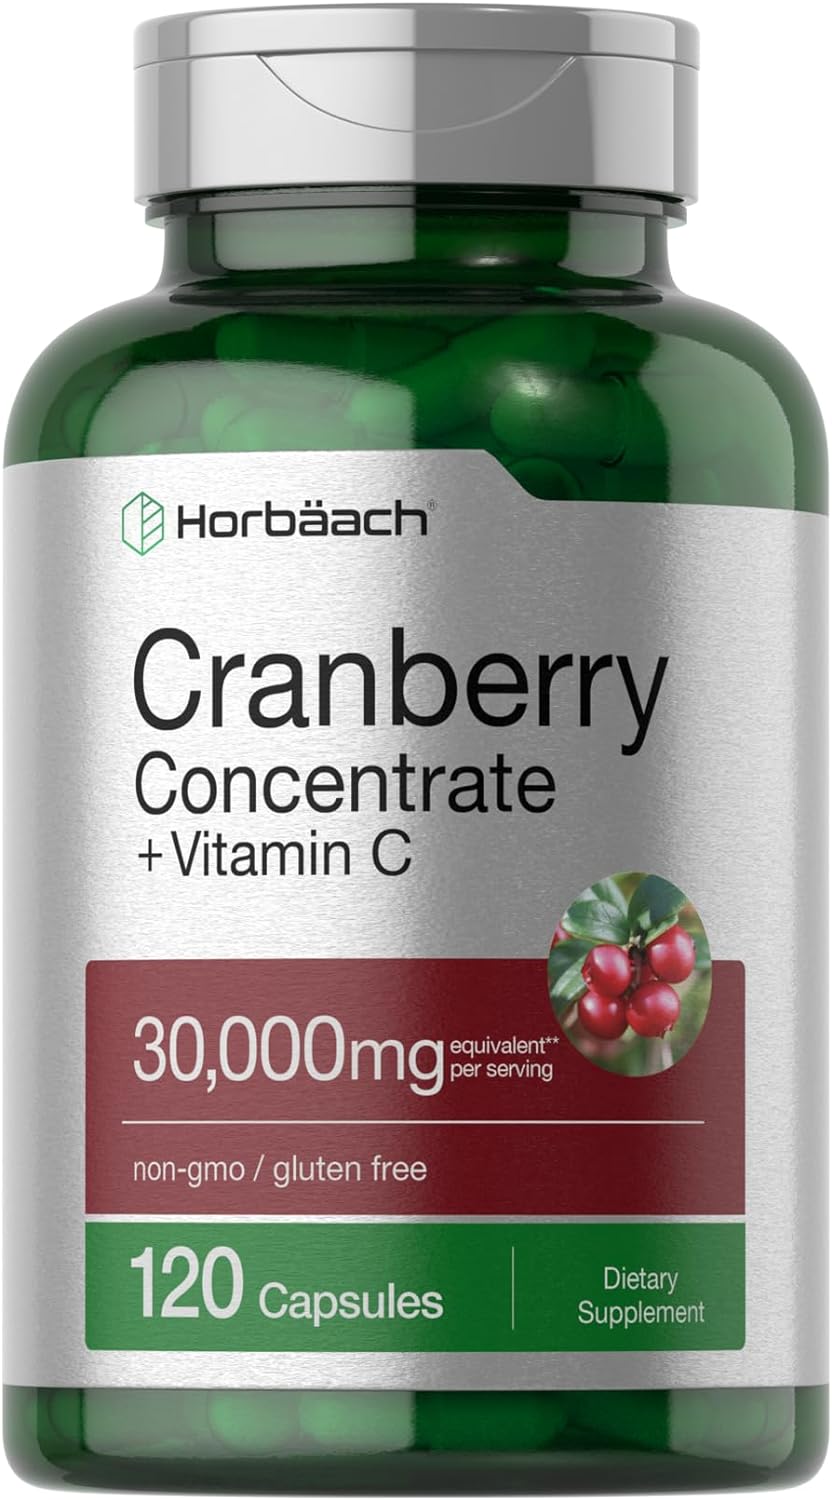 Cranberry Concentrate Extract Pills + Vitamin C Review